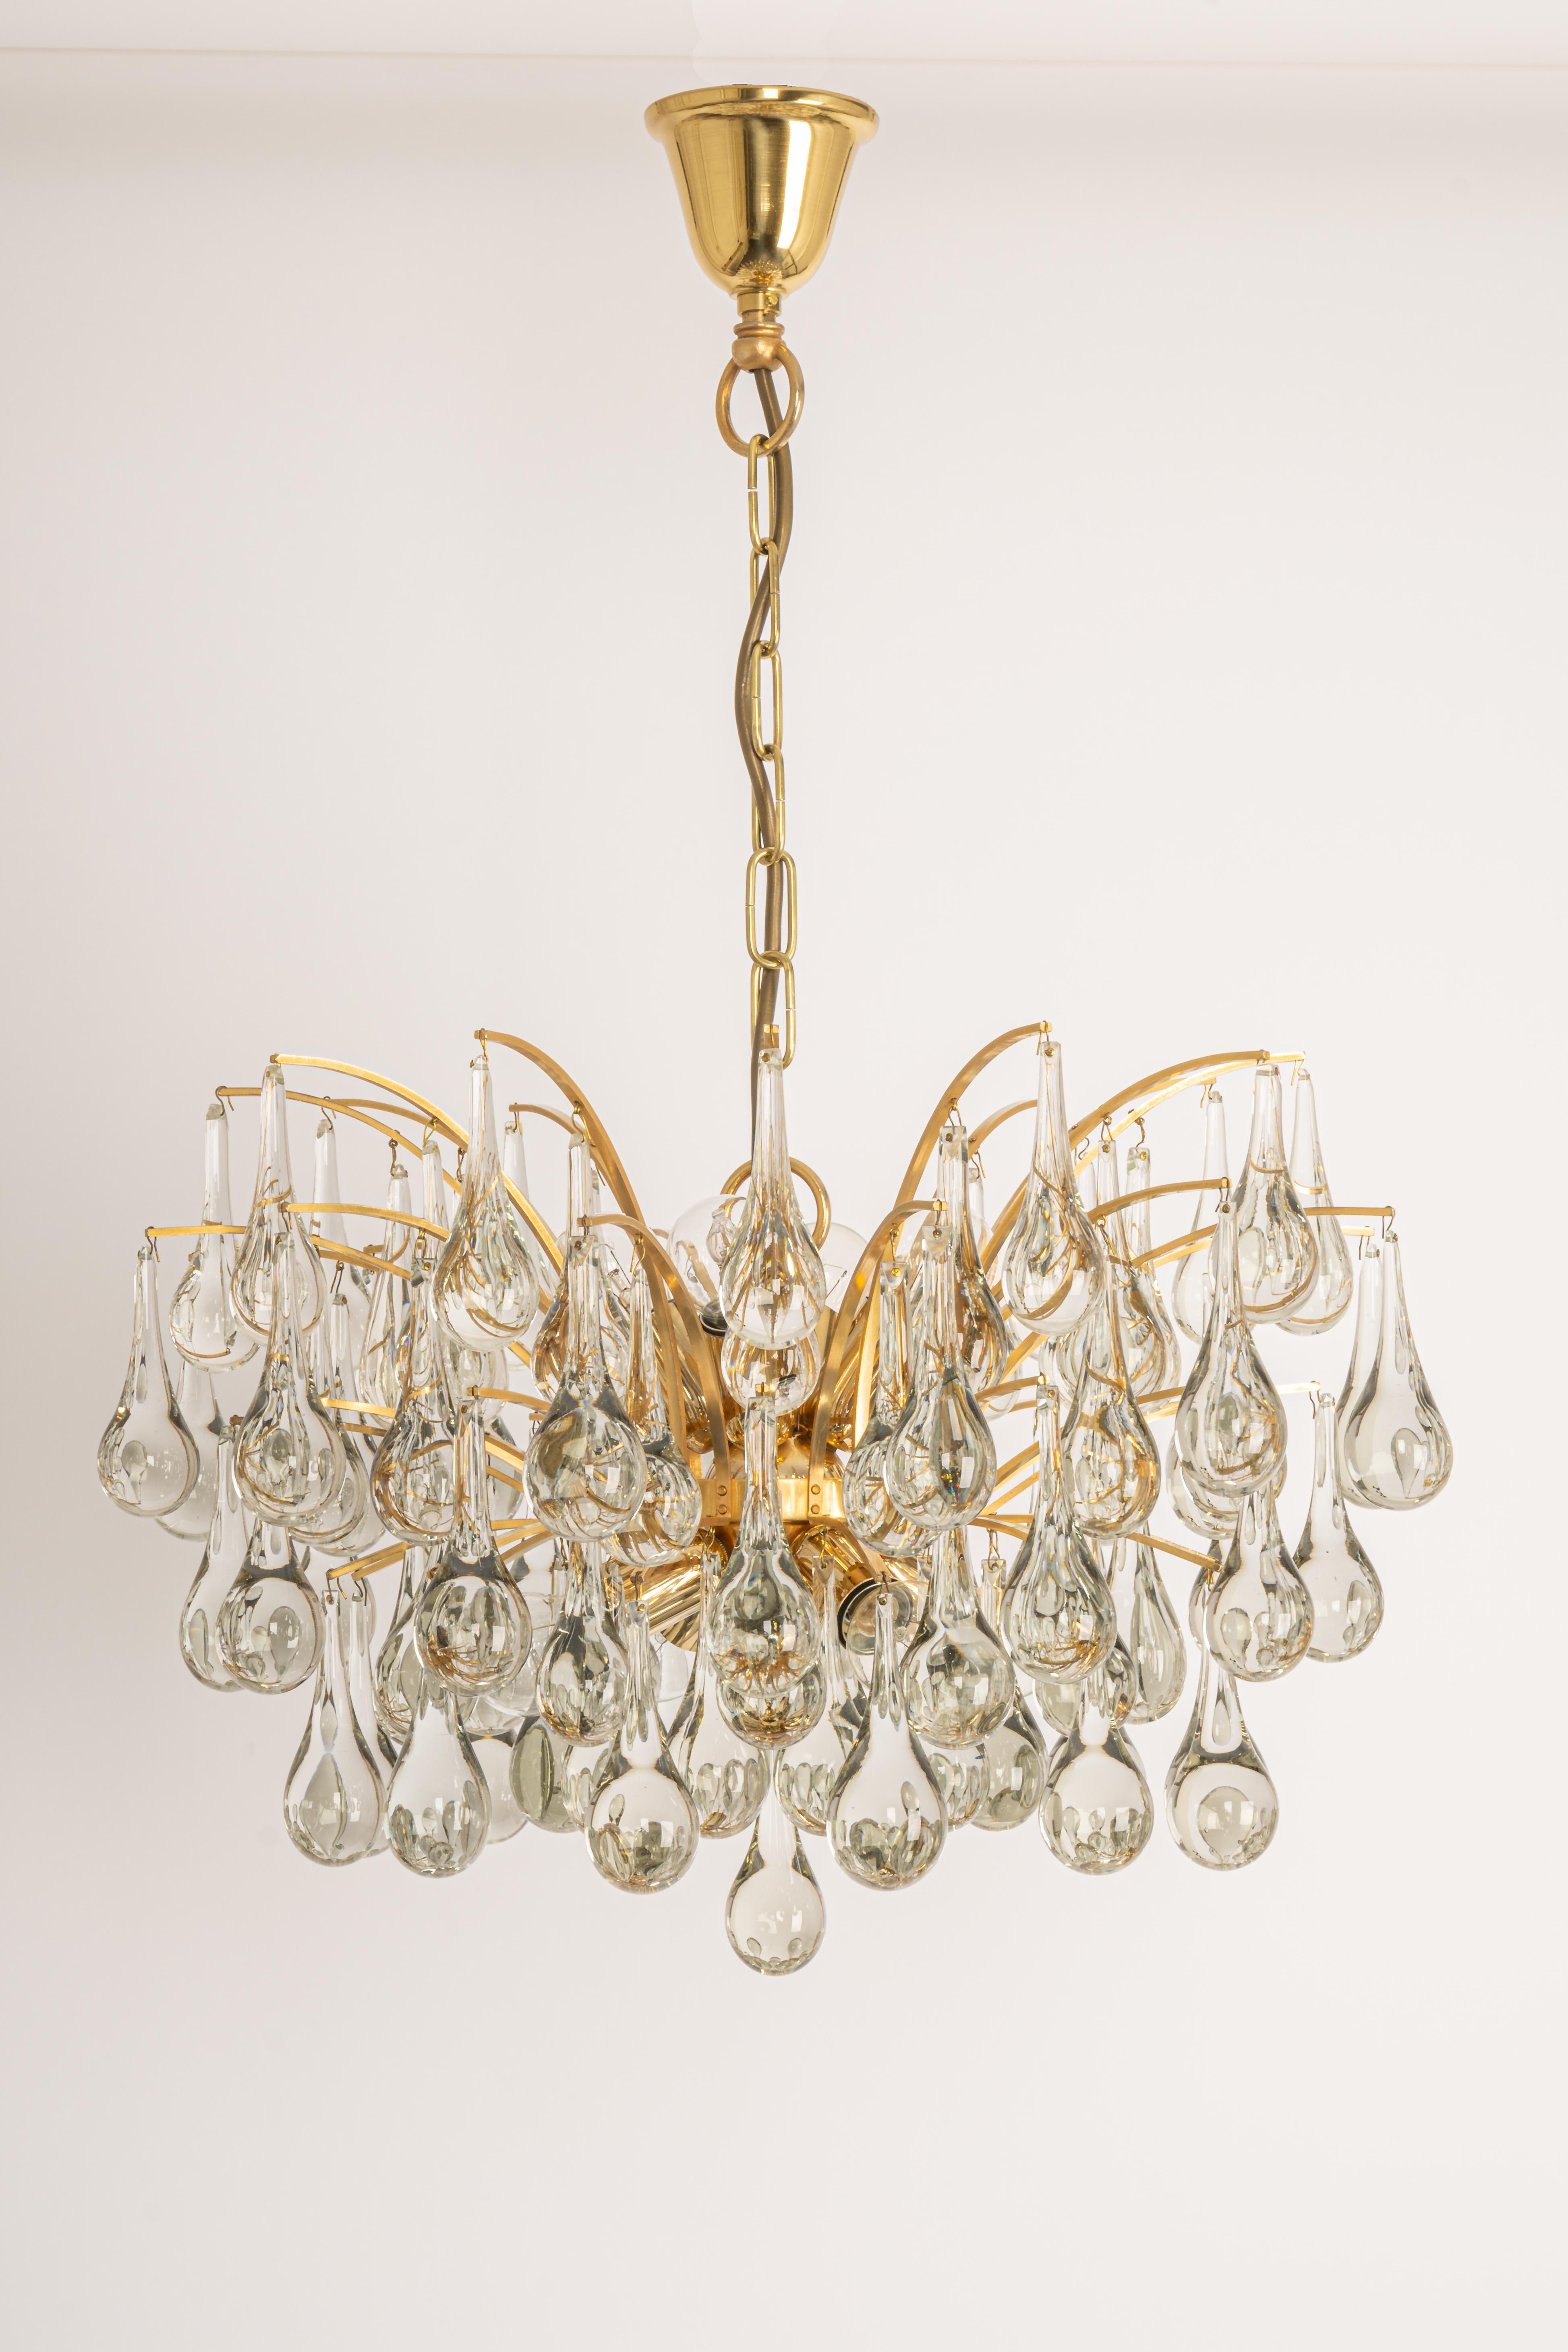 1 of 2 stunning chandeliers by Christoph Palme, Germany, manufactured in the 1970s. It’s composed of Murano teardrop glass pieces on a gilded brass frame.

High quality and in very good condition. Cleaned, well-wired, and ready to use. 

The